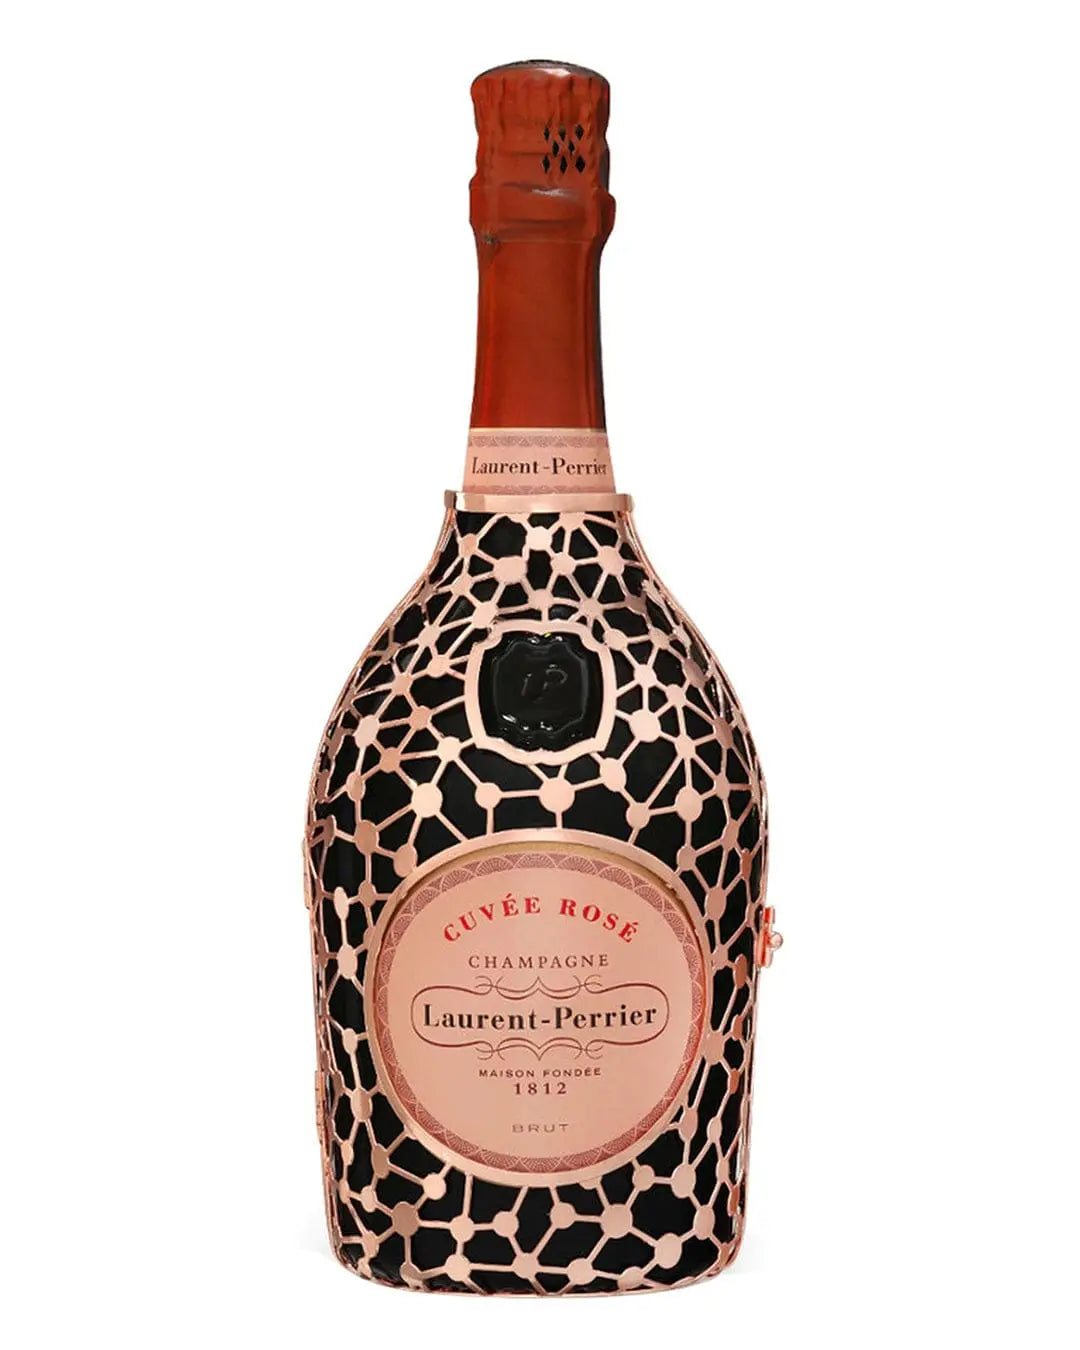 Laurent-Perrier Cuvee Rose Constellation Robe Champagne, 75 cl Champagne & Sparkling 3258434140008